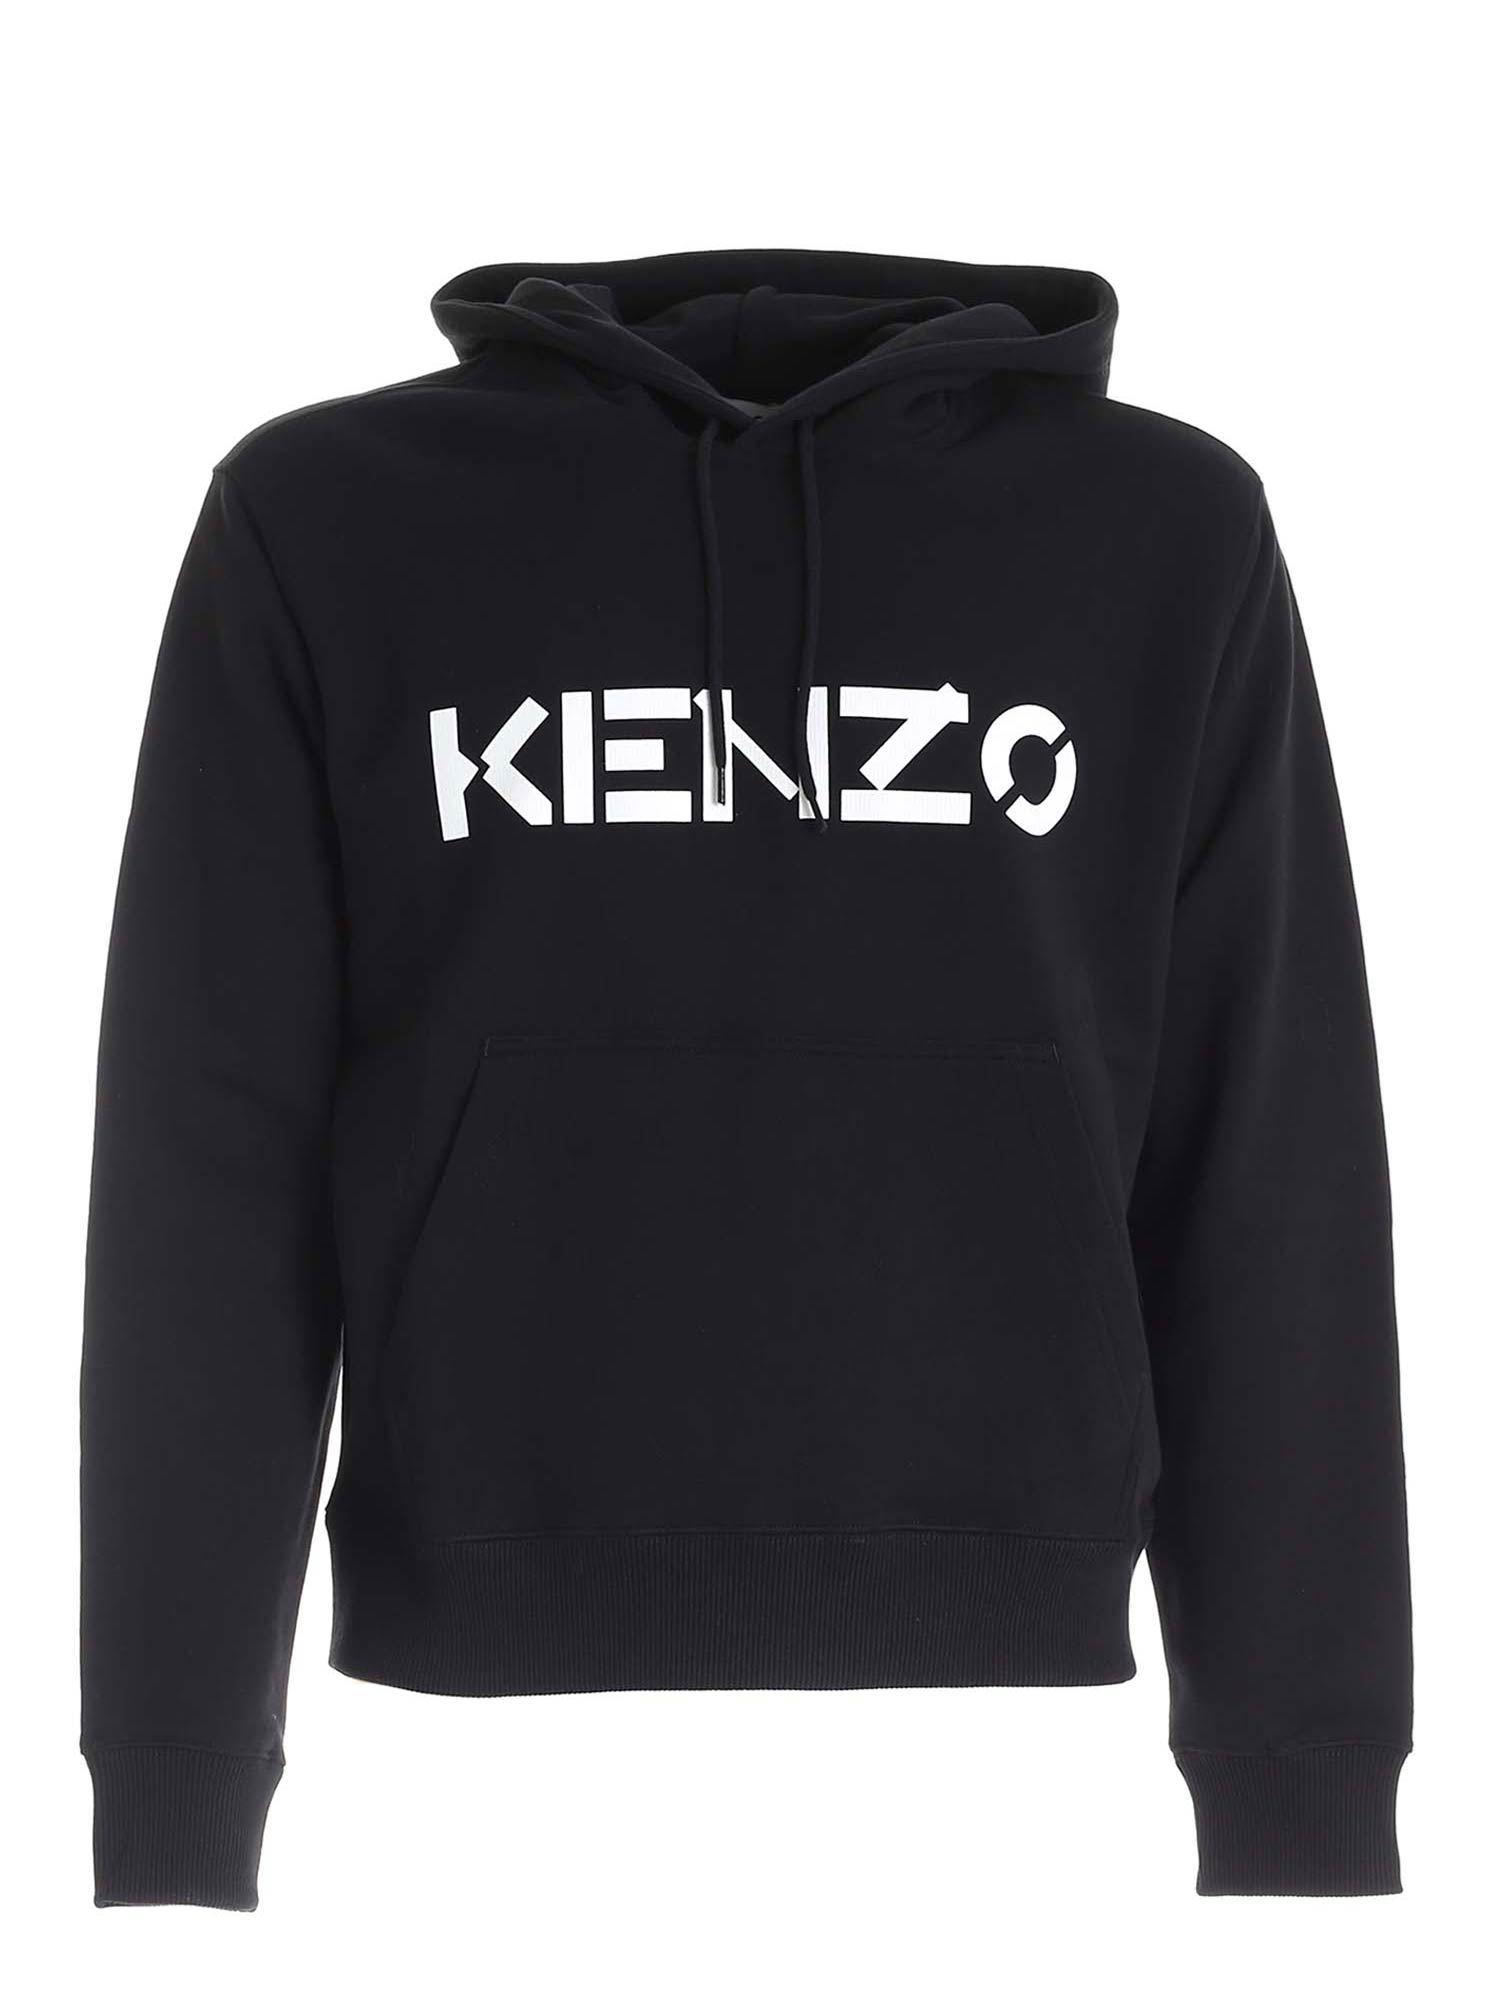 KENZO Cotton Hoodie With Logo Print in Black for Men - Lyst